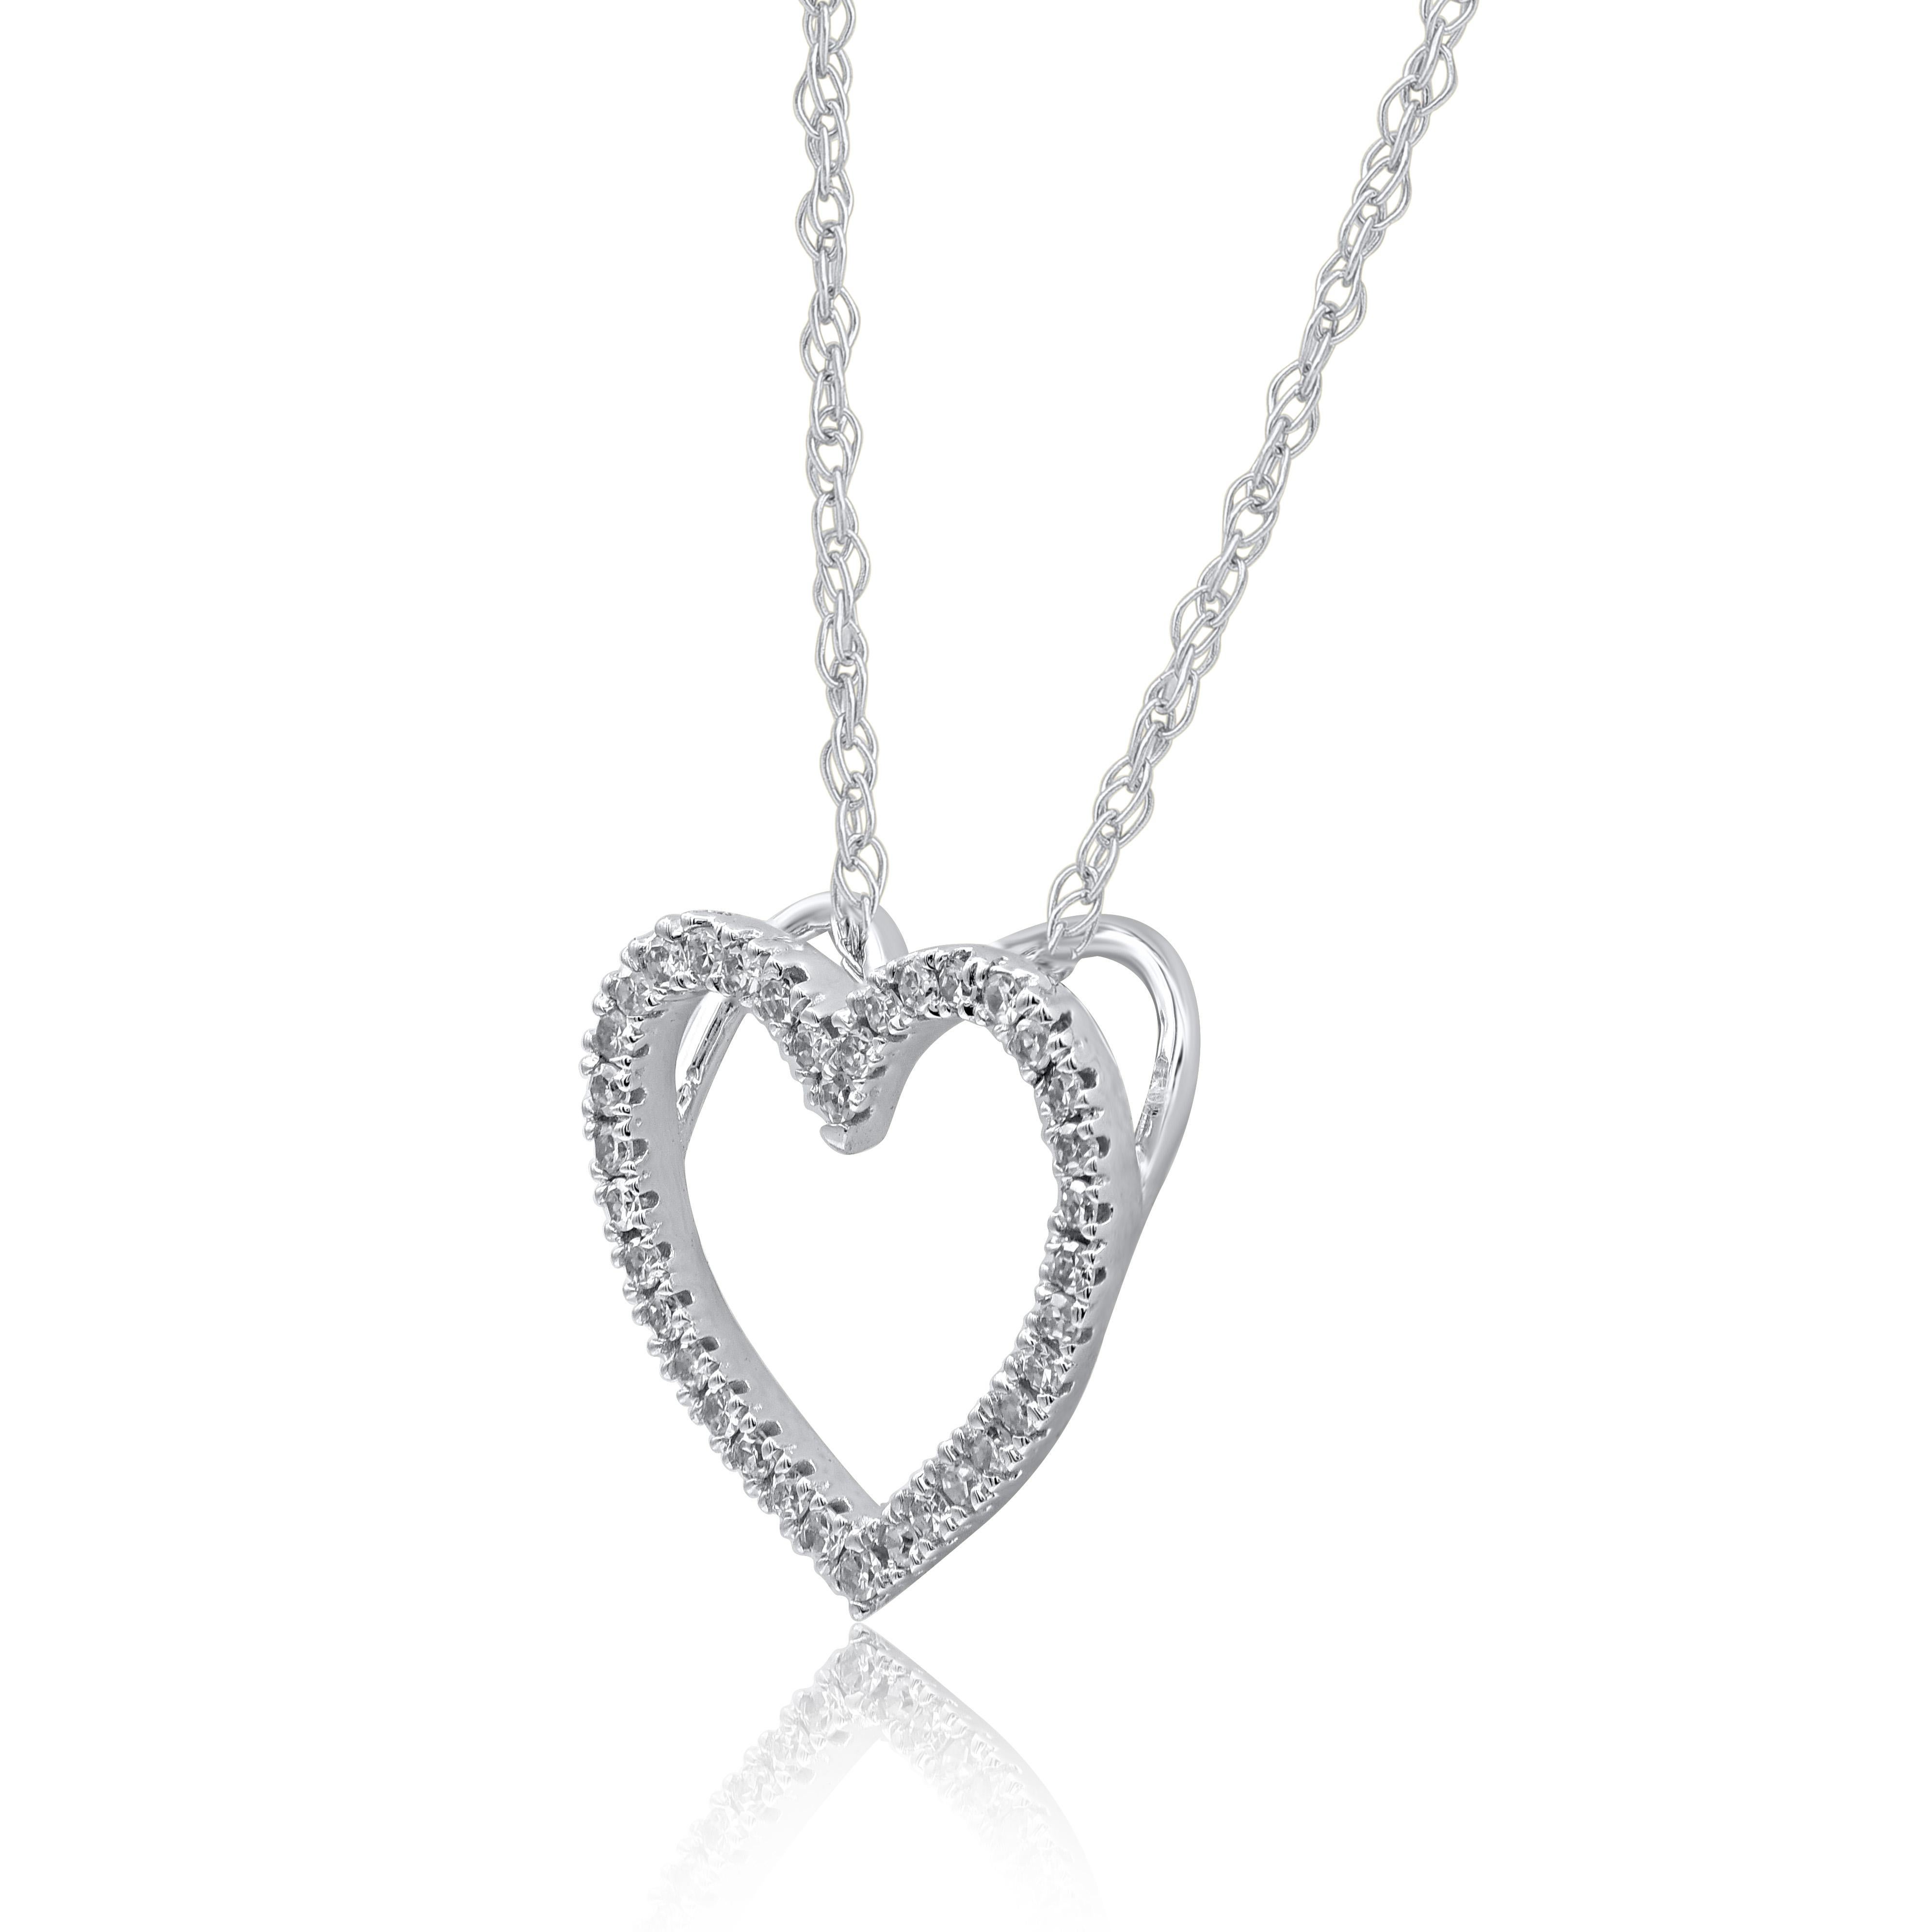 A striking addition when worn on its own, this diamond pendant makes a stunning impression. This heart pendant is crafted from 14-karat white gold and features 36 single cut diamonds set in prong setting. H-I color I2 clarity and a high polish